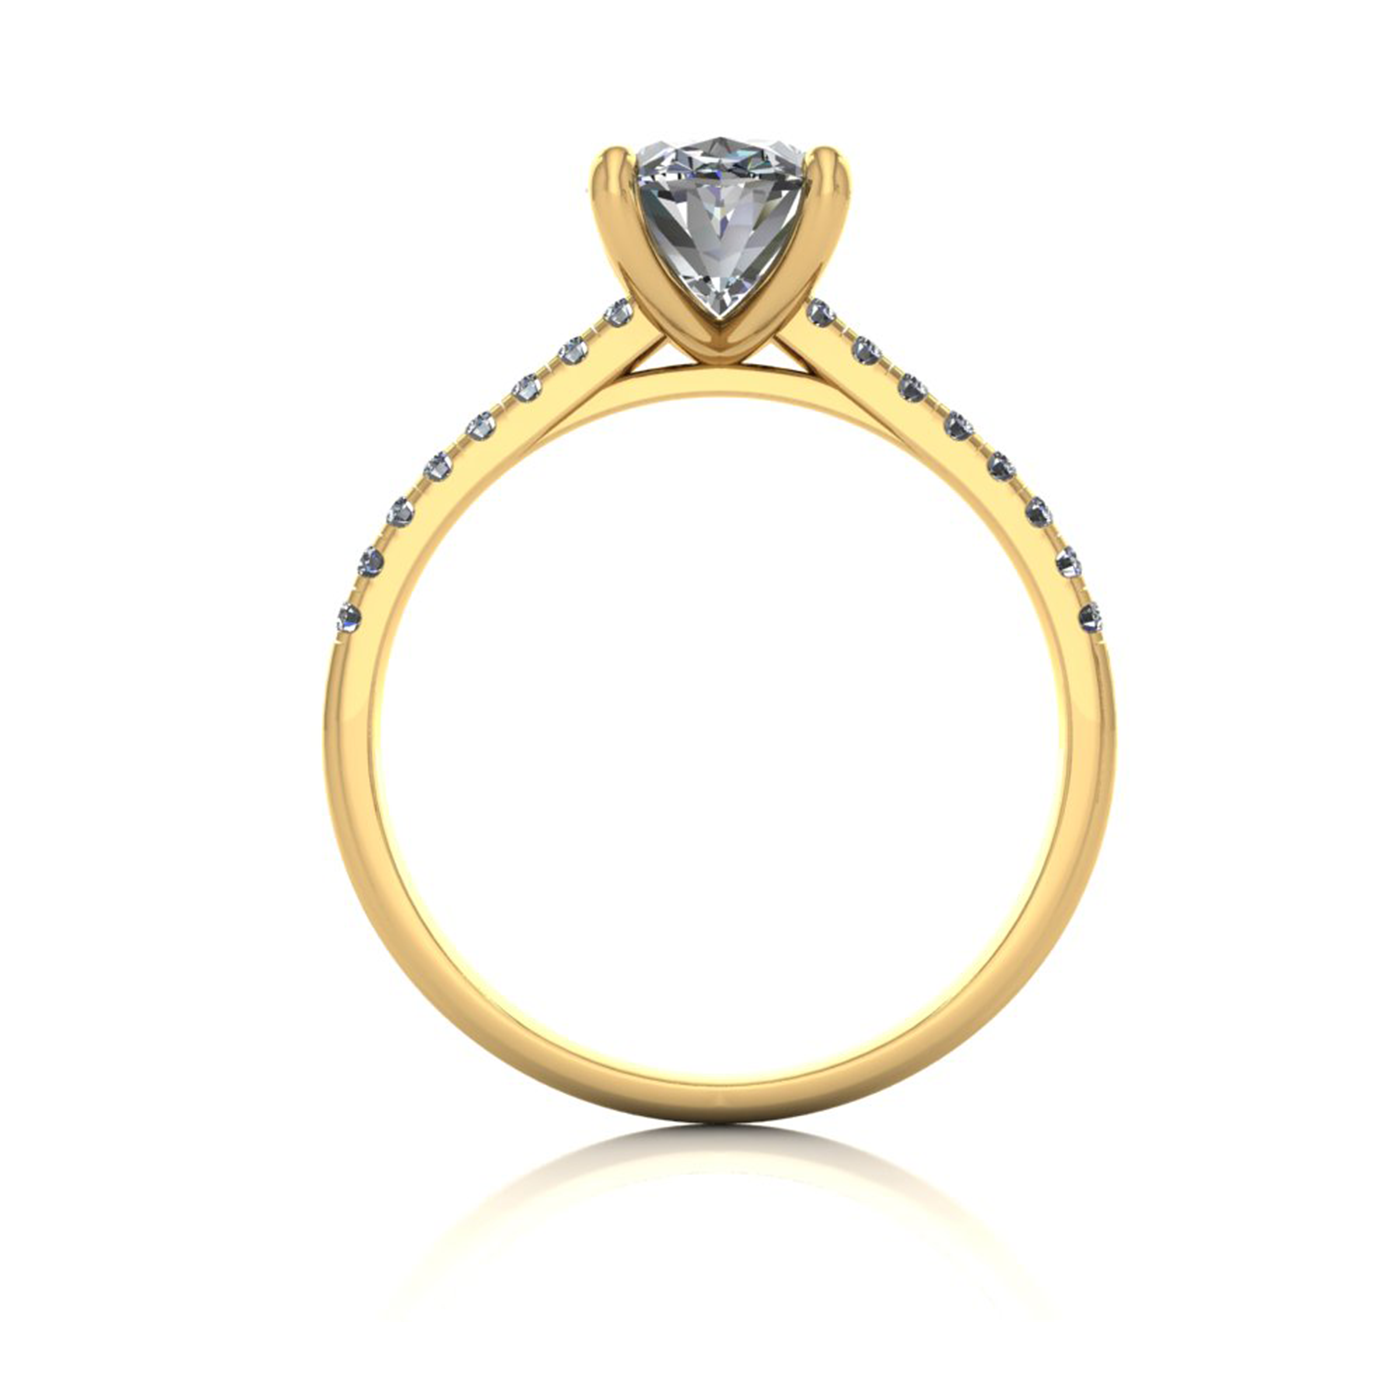 18k yellow gold  1,50 ct 4 prongs oval cut diamond engagement ring with whisper thin pavÉ set band Photos & images